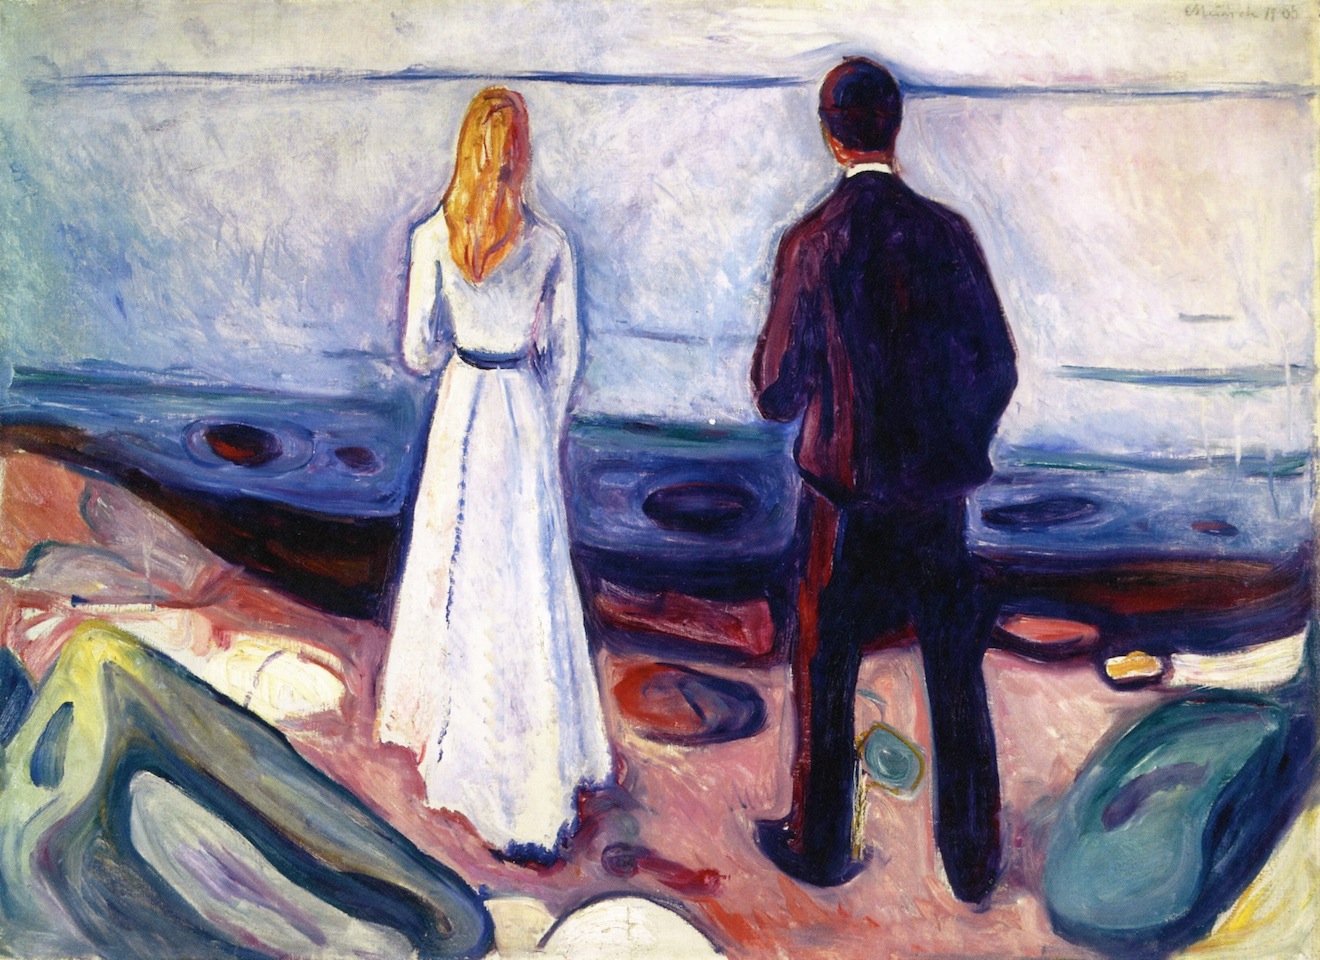 Two Human Beings (The Lonely Ones) by Edvard Munch - 1898 - 80 × 110 cm private collection